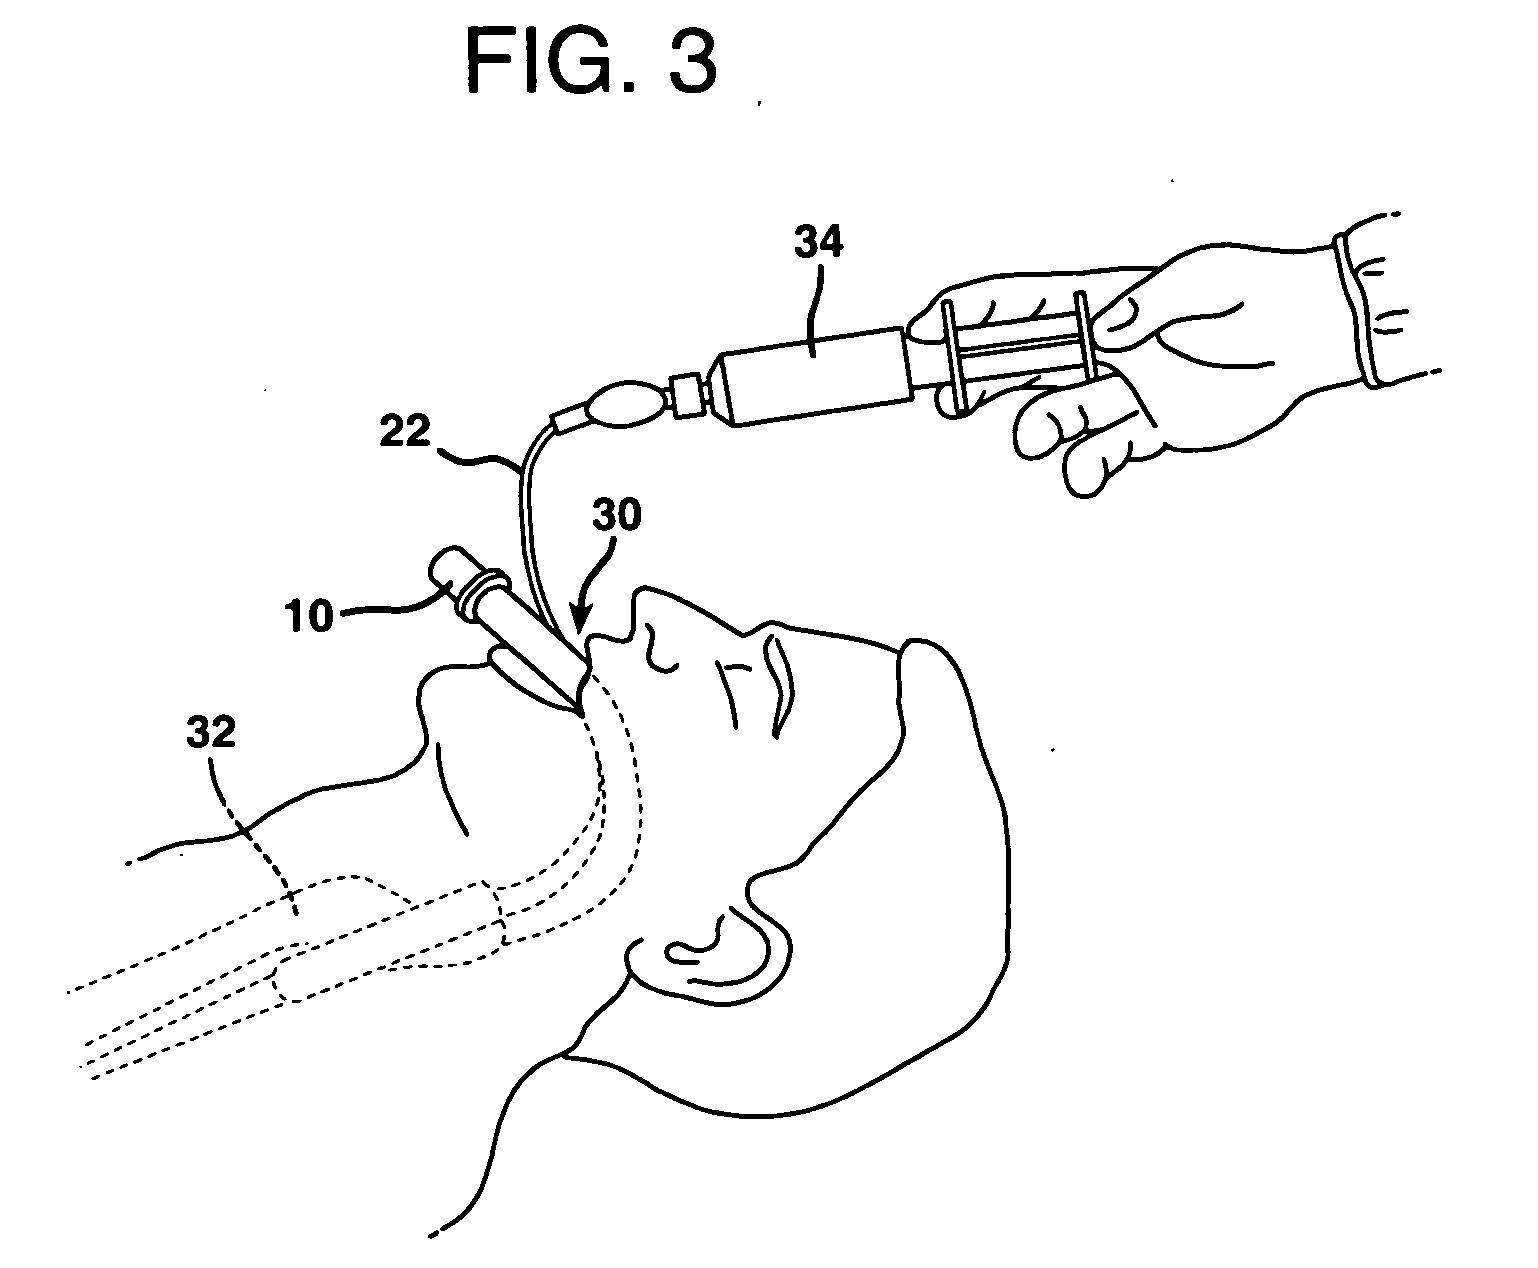 Composition for use with artificial airway devices